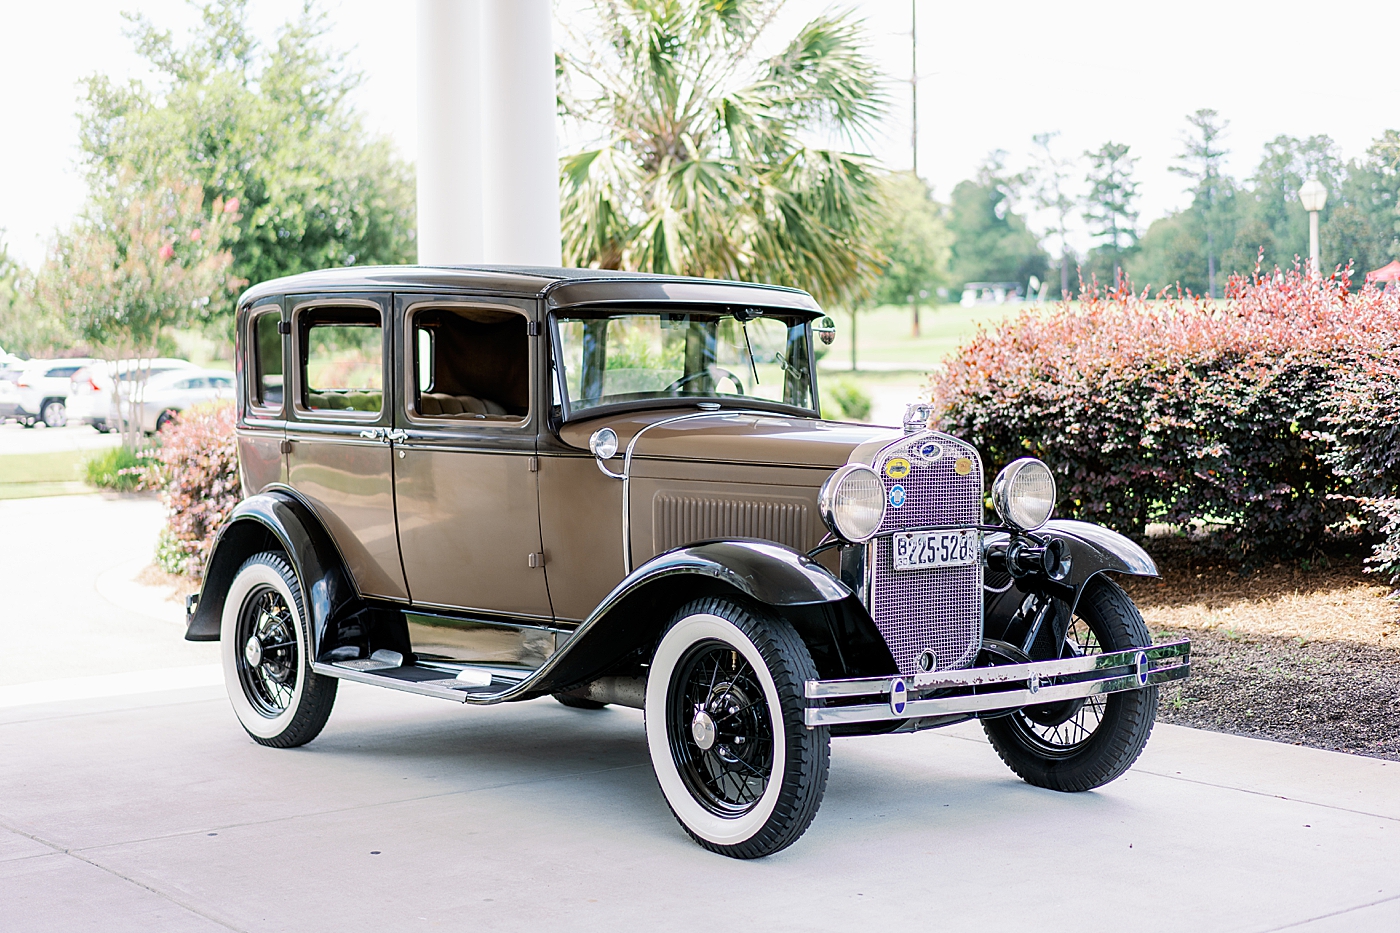 Antique getaway car for Simple Southern Country Club Wedding | Image by Annie Laura Photo| Image by Annie Laura Photo